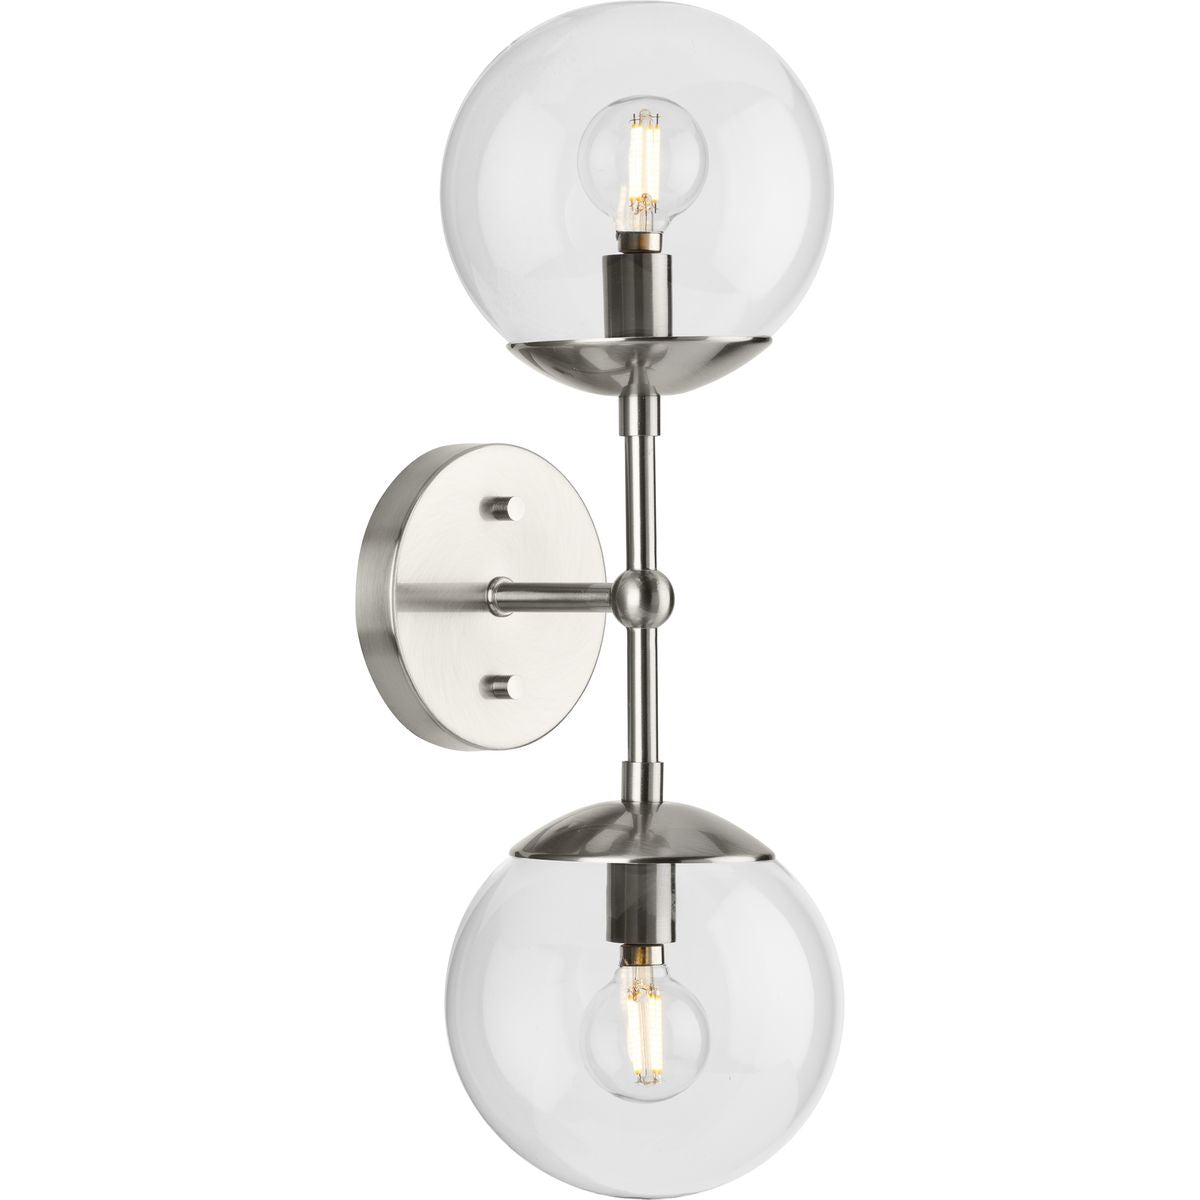 PROGRESS LIGHTING P710114-009 Brushed Nickel Atwell Collection Two-Light Brushed Nickel Mid-Century Modern Wall Sconce